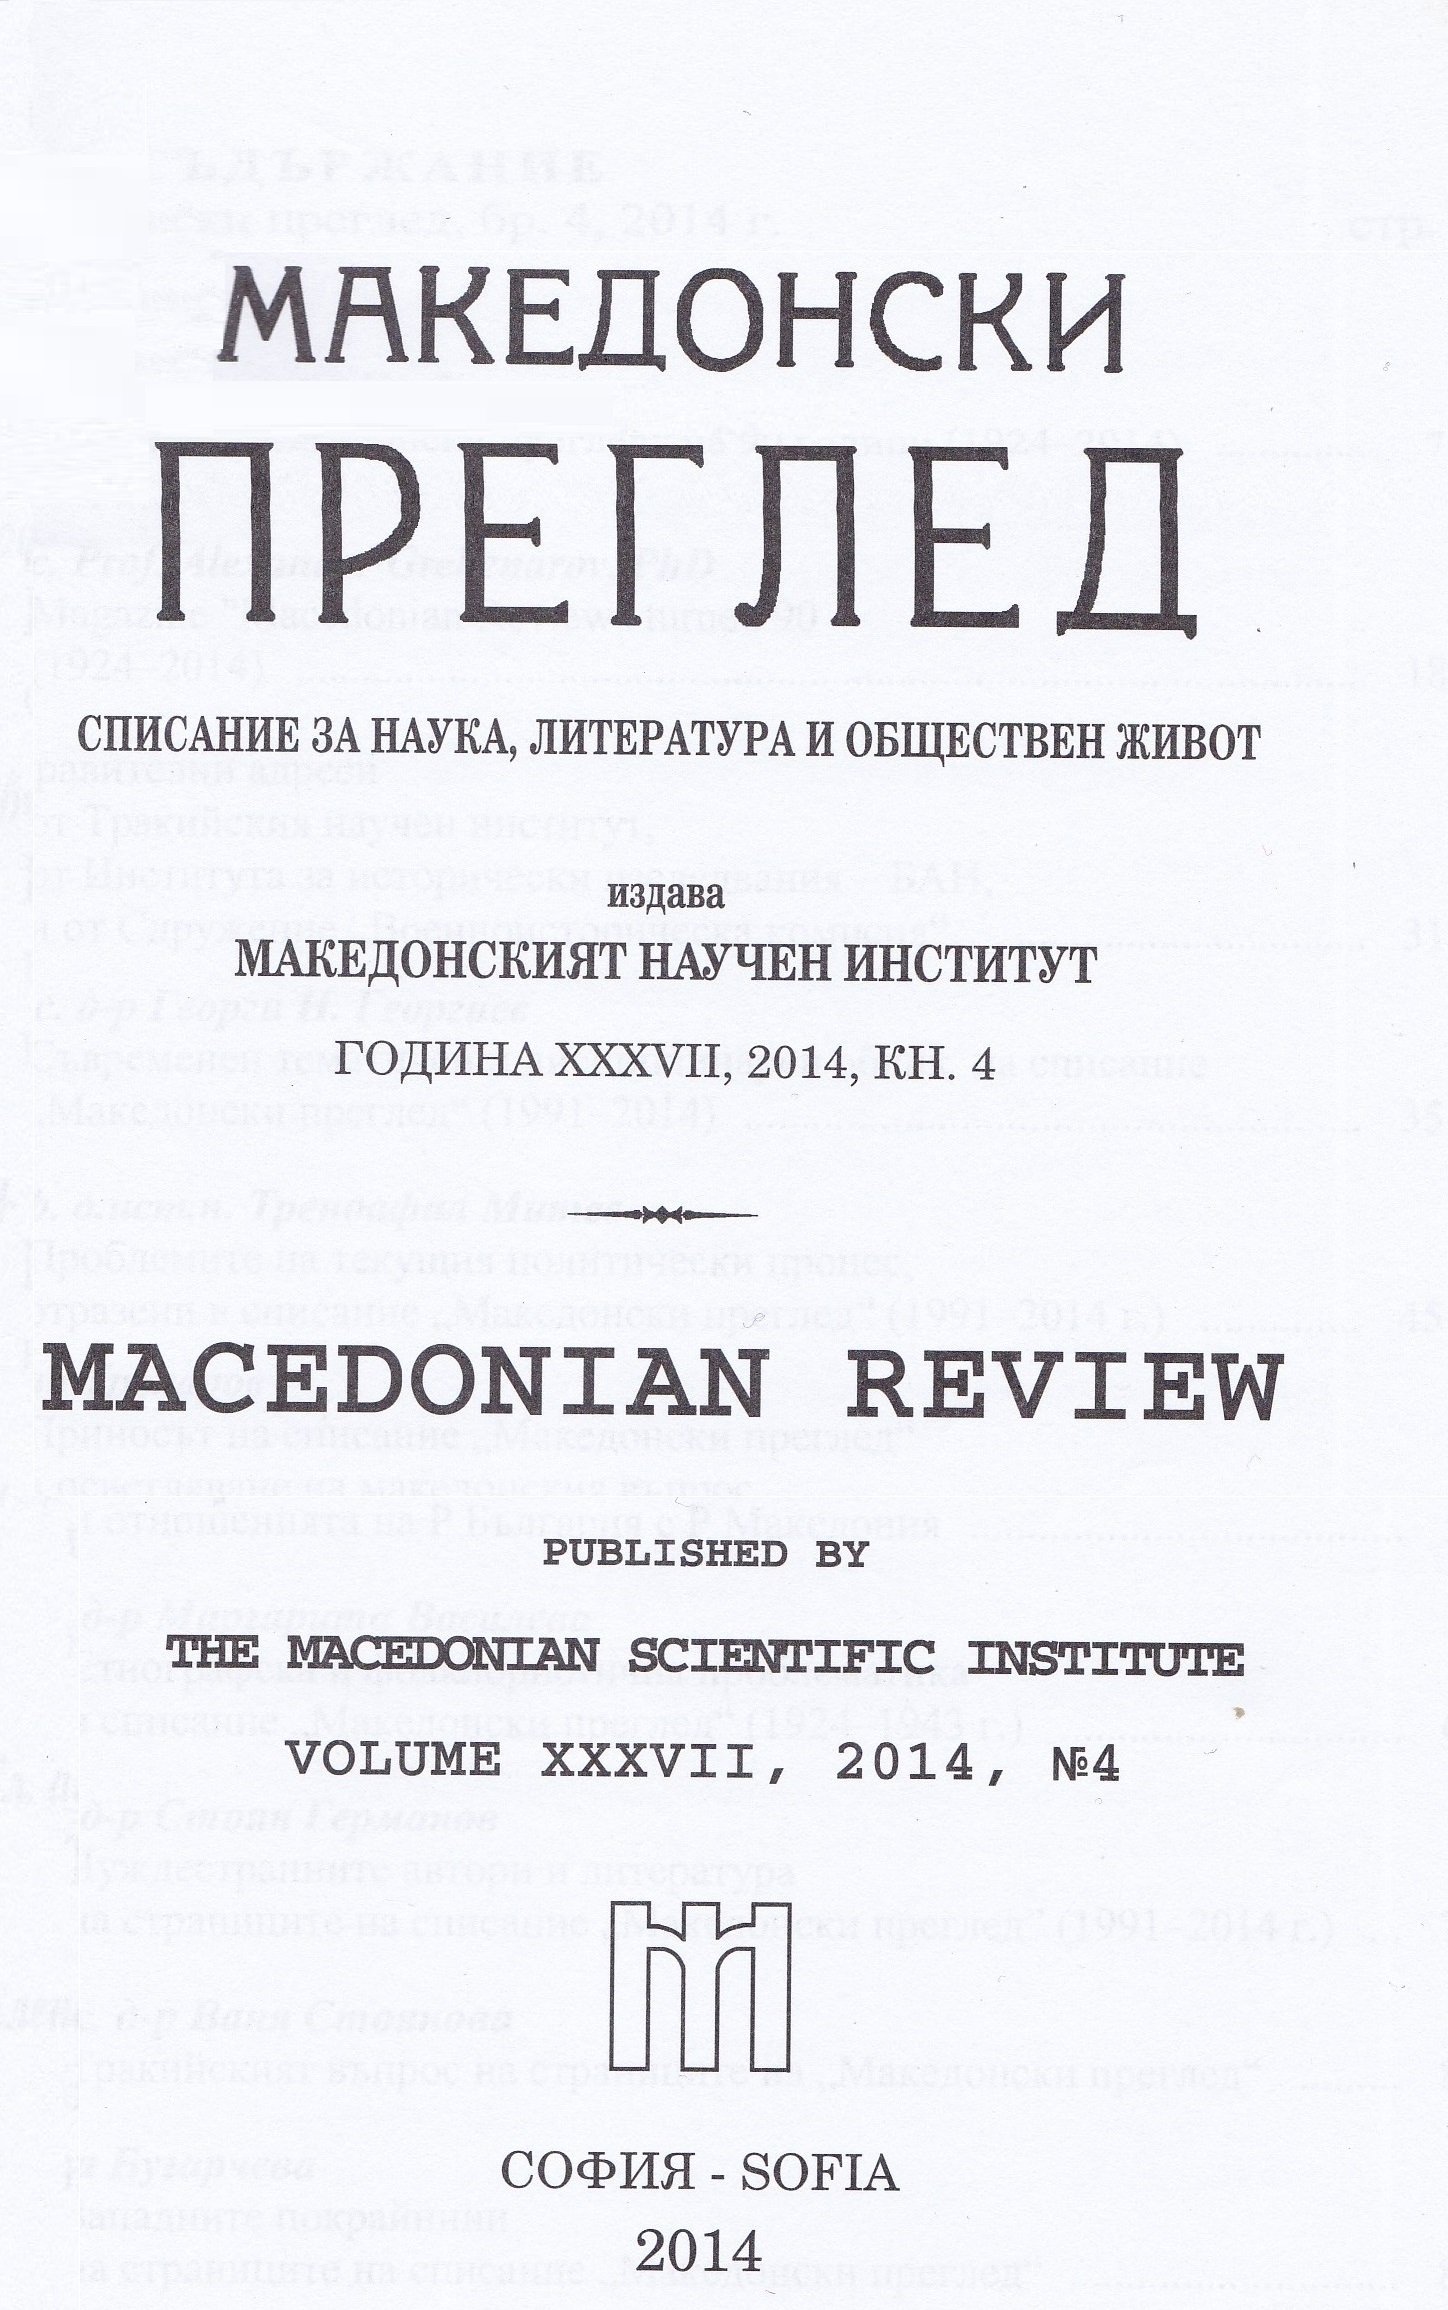 Academician Ivan Duridanov as author in magazine "Macedonian Review" Cover Image